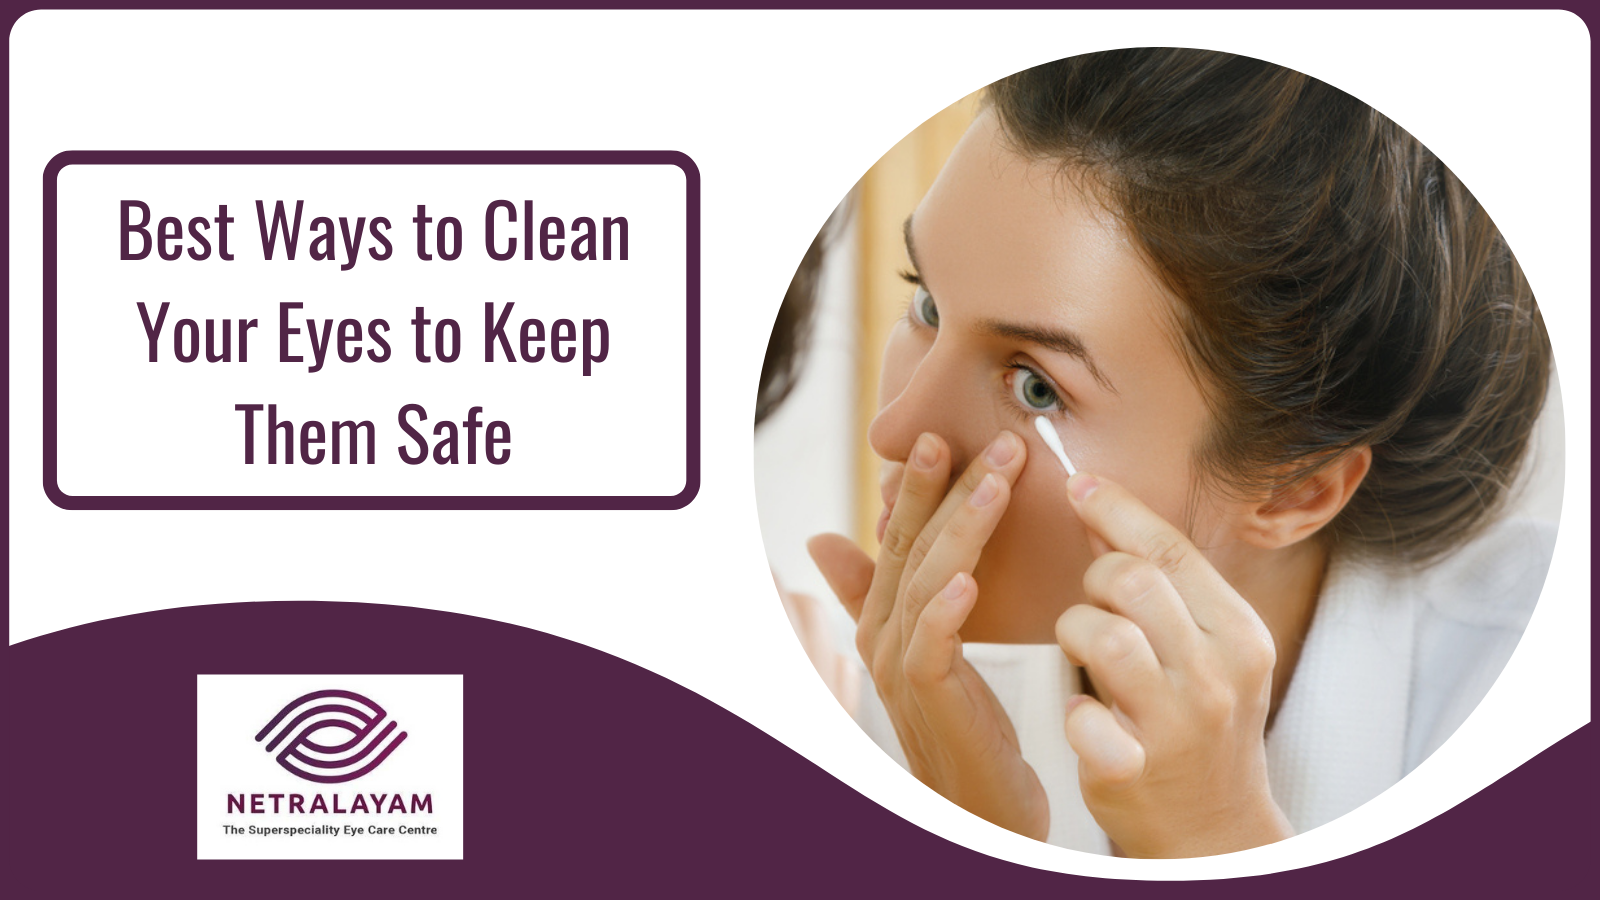 Best Ways to Clean Your Eyes to Keep Them Safe